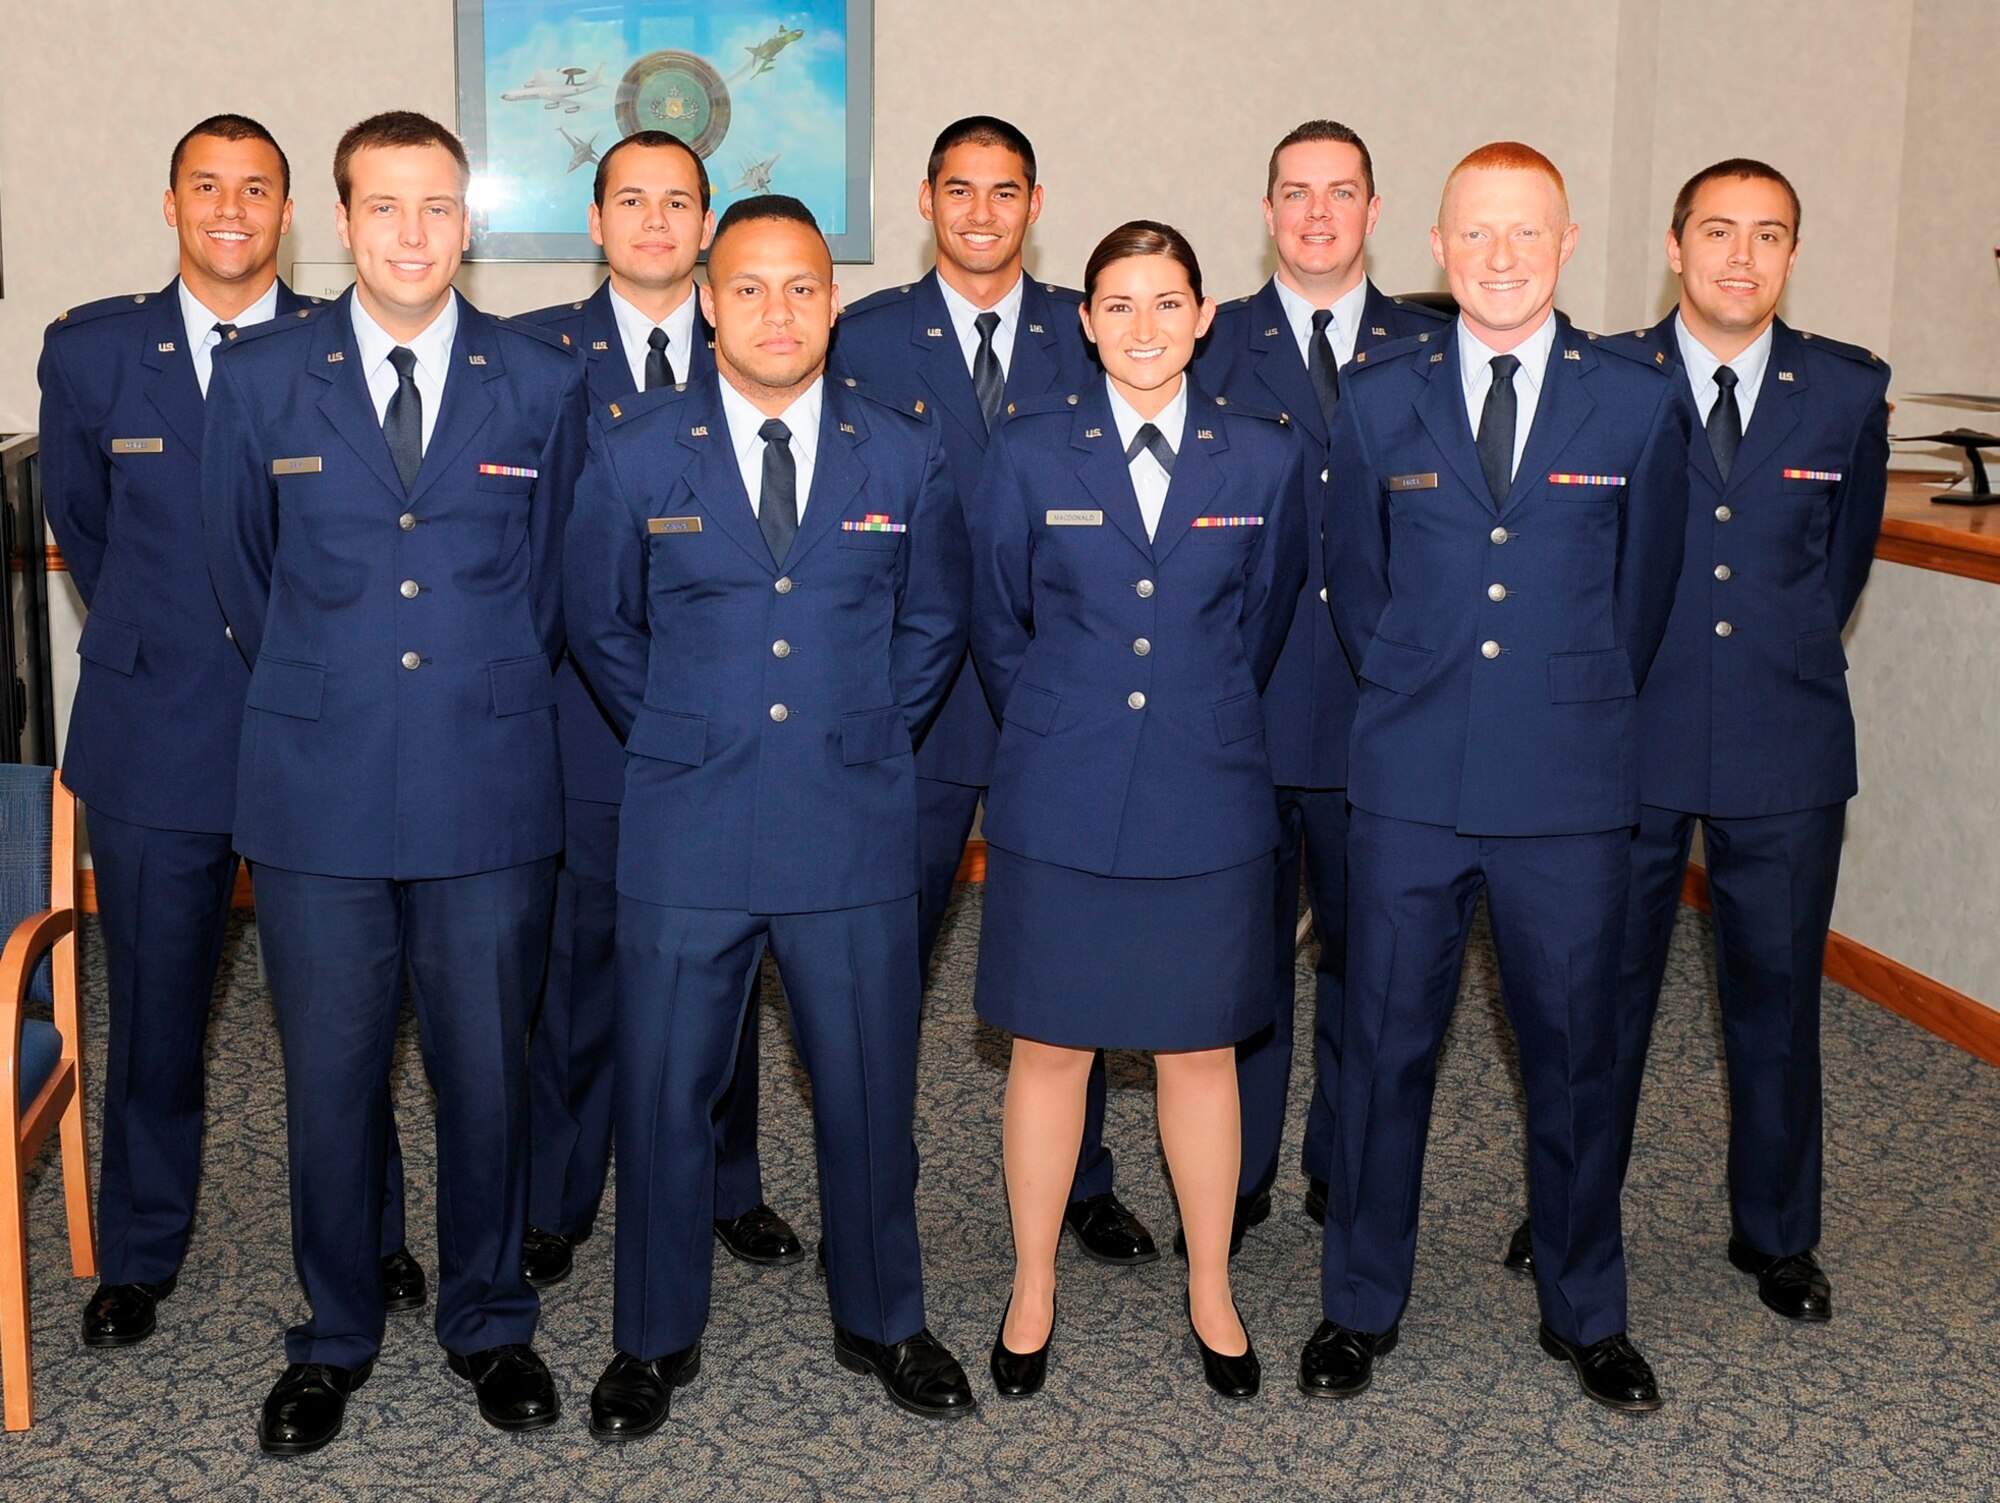 Graduate members of Air Battle Management Class 12010 pose for a celebratory photo after graduating on April 25, 2012. (U.S. Air Force photo by Christopher Cokeing)